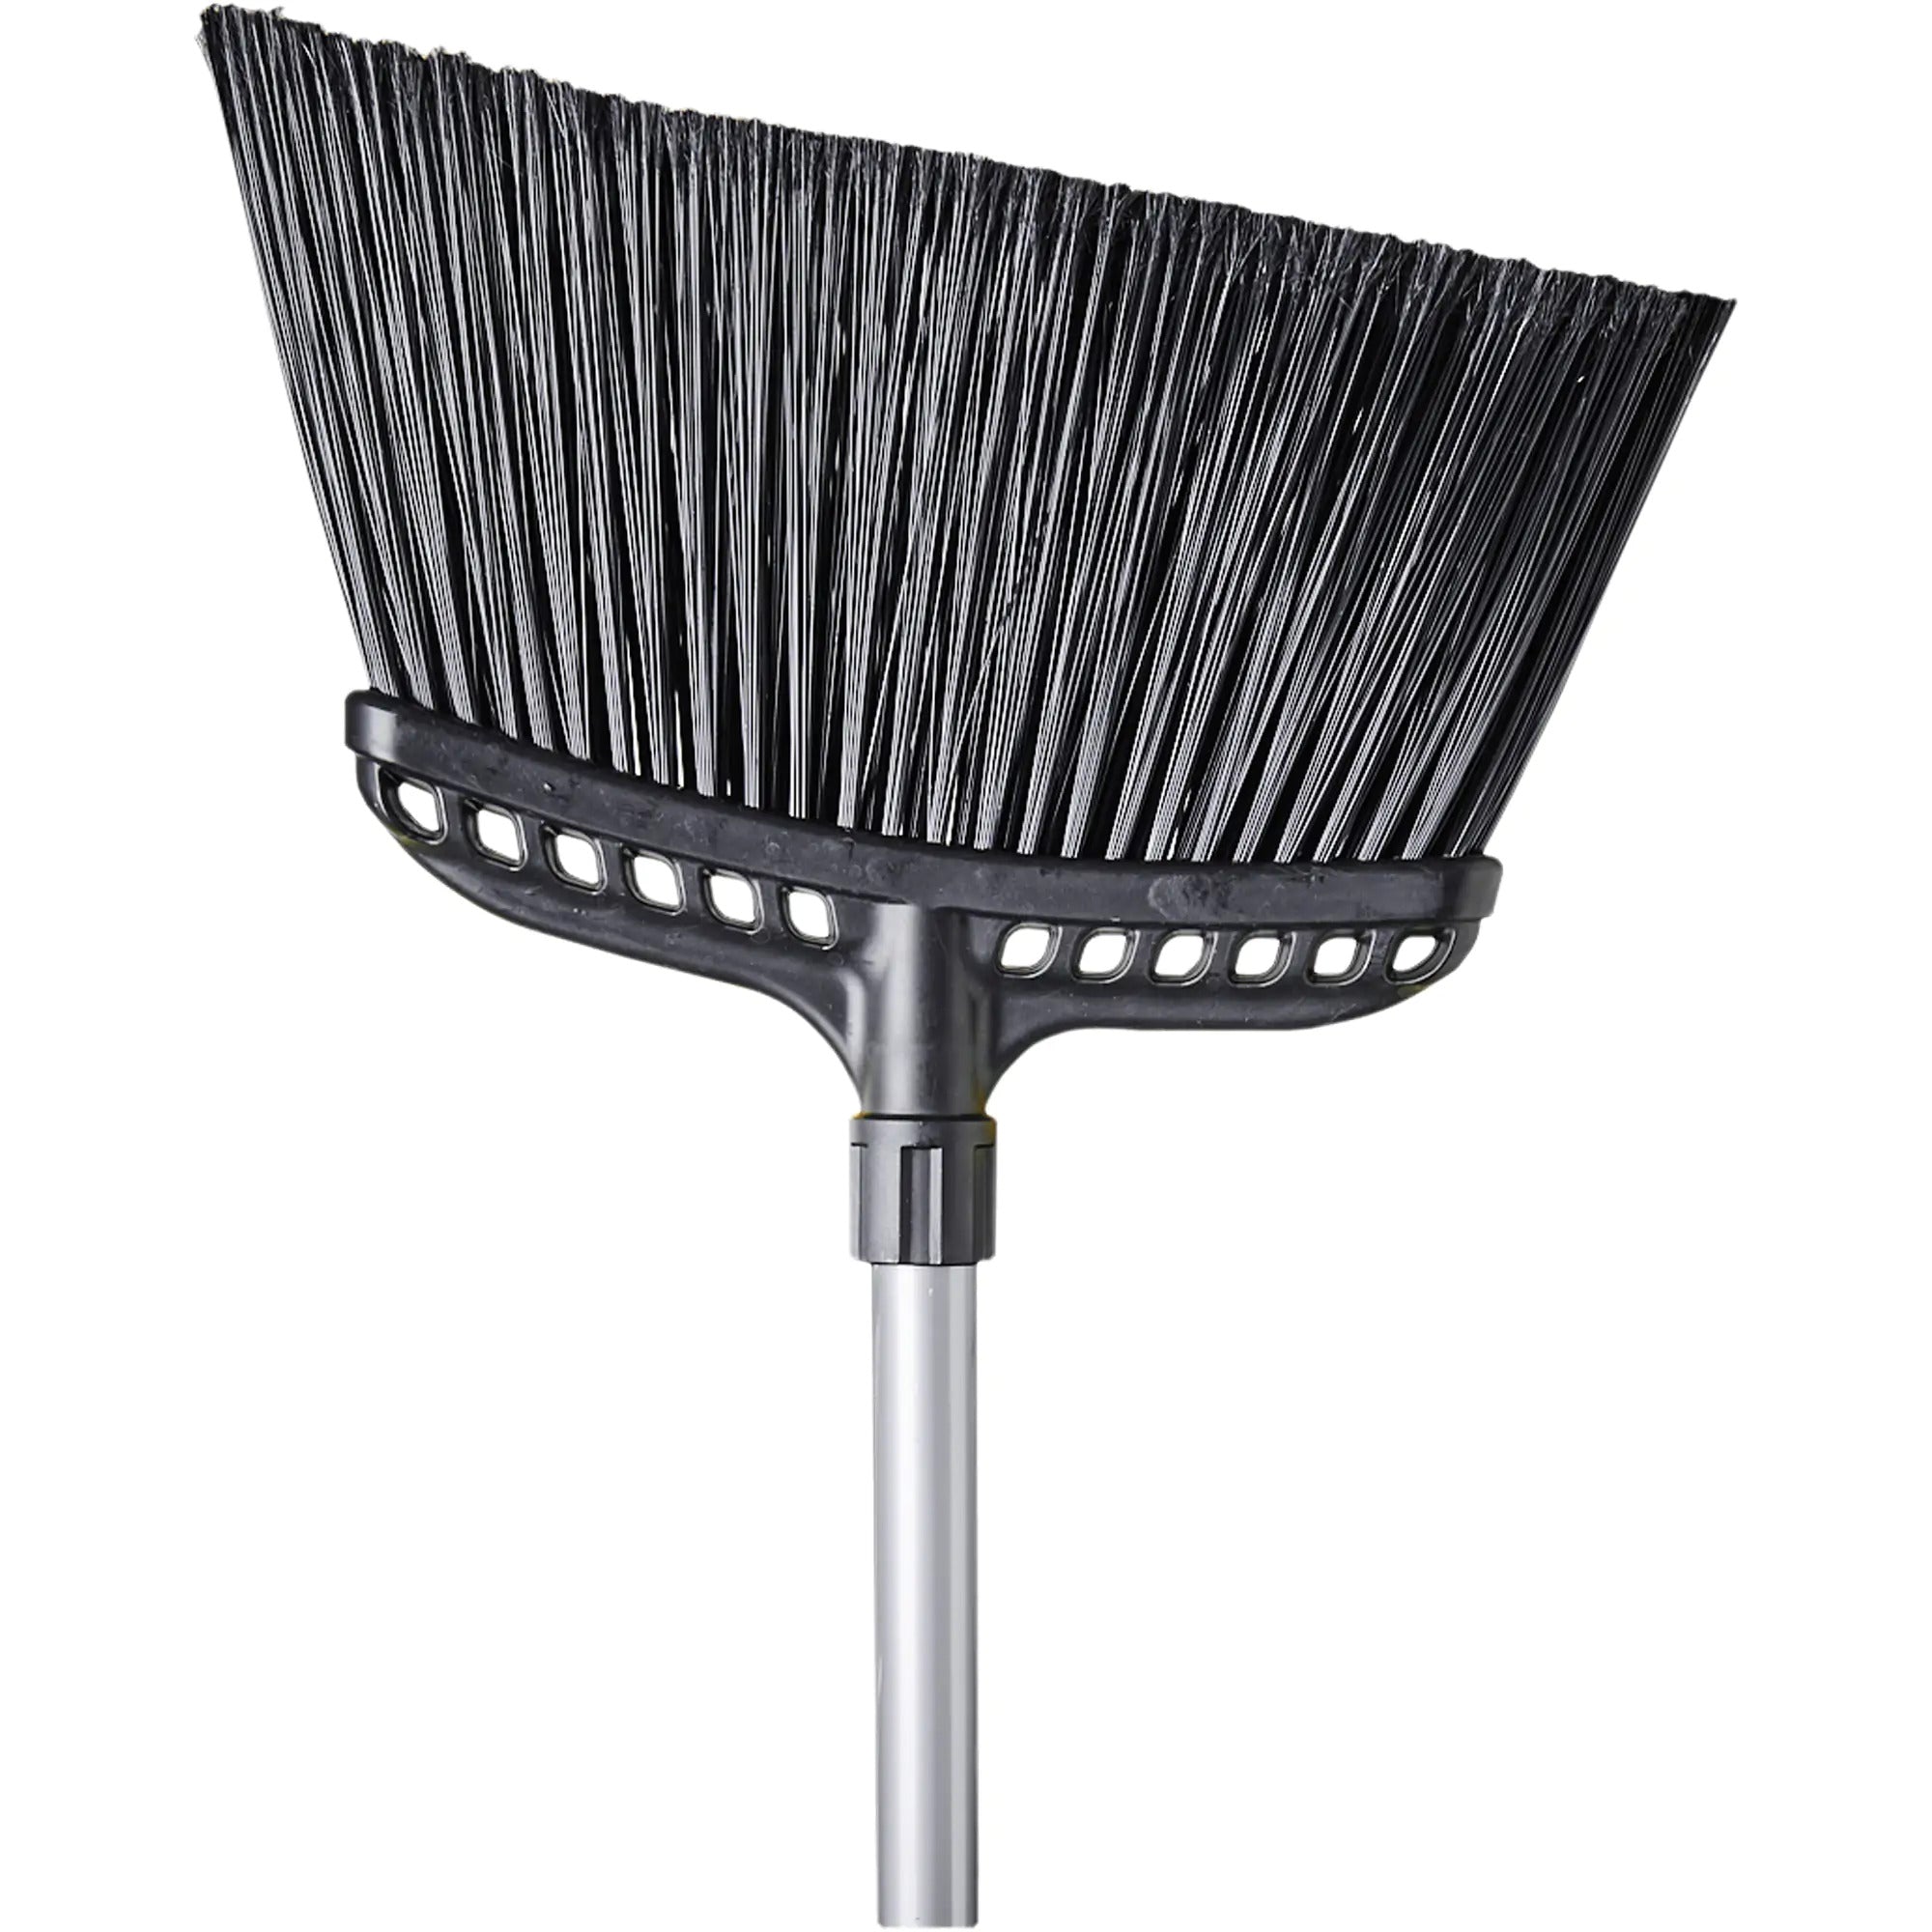 Joybos Magic Broom 360 Degree Broom Sweeper For Hair And Dust Cleaning,  180° Rotation, 144cm Extended Pole For Household Kitchen Use From Ren10,  $10.13